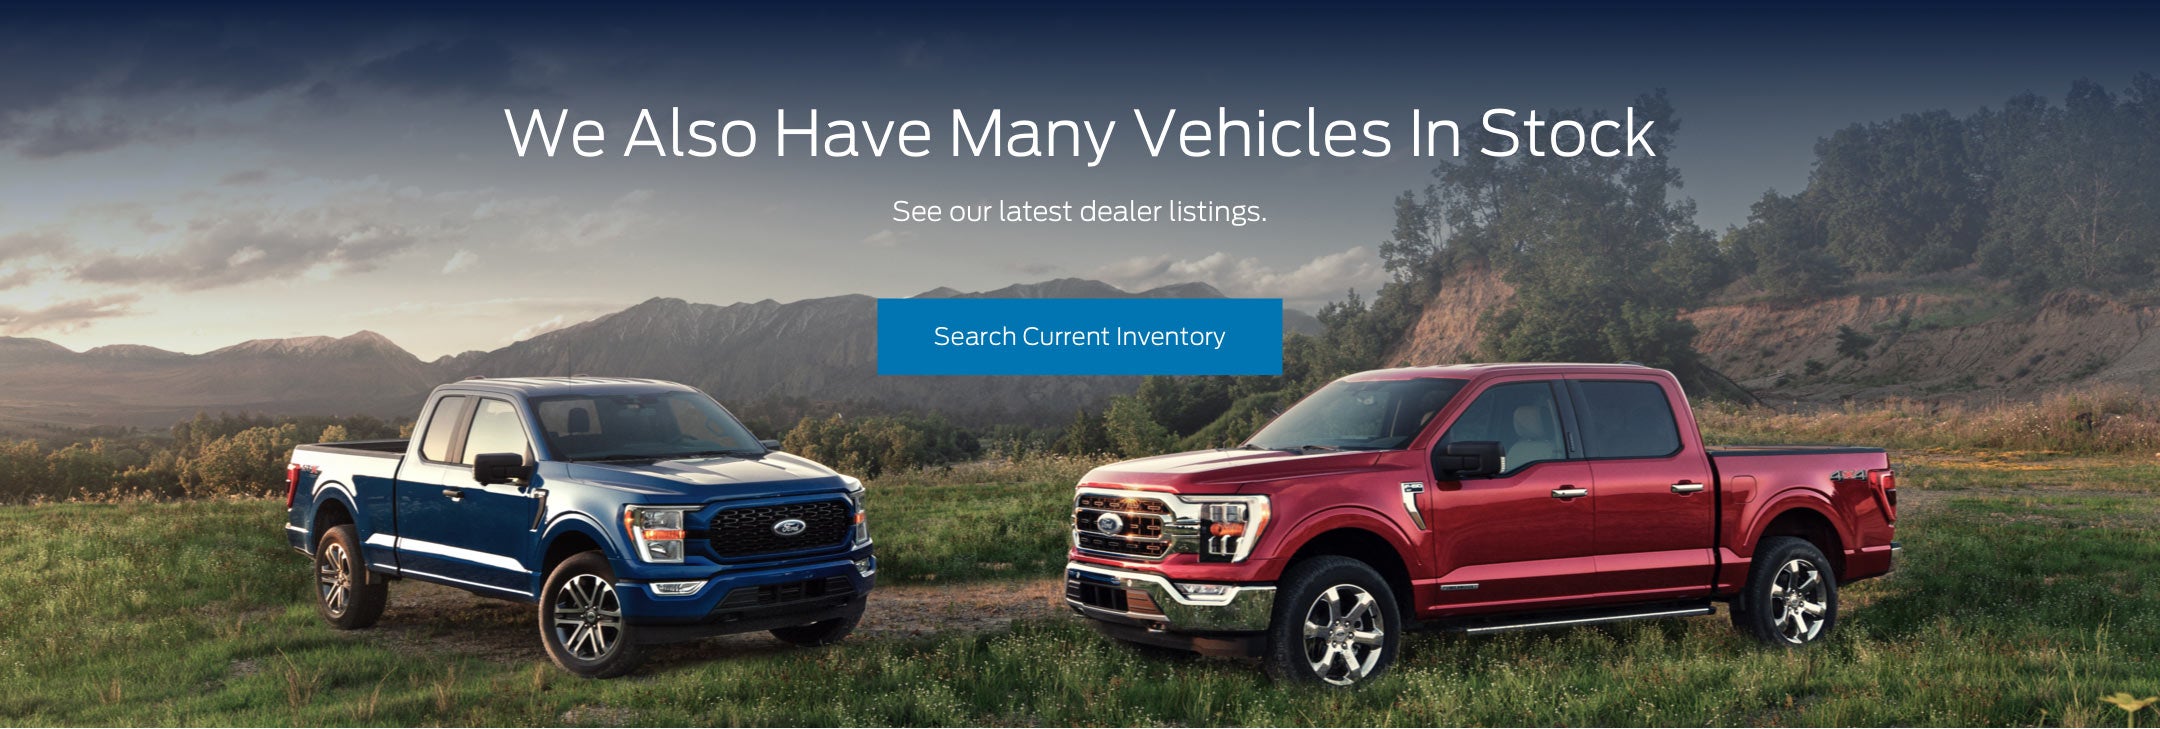 Ford vehicles in stock | Auffenberg Ford, Inc. in Belleville IL